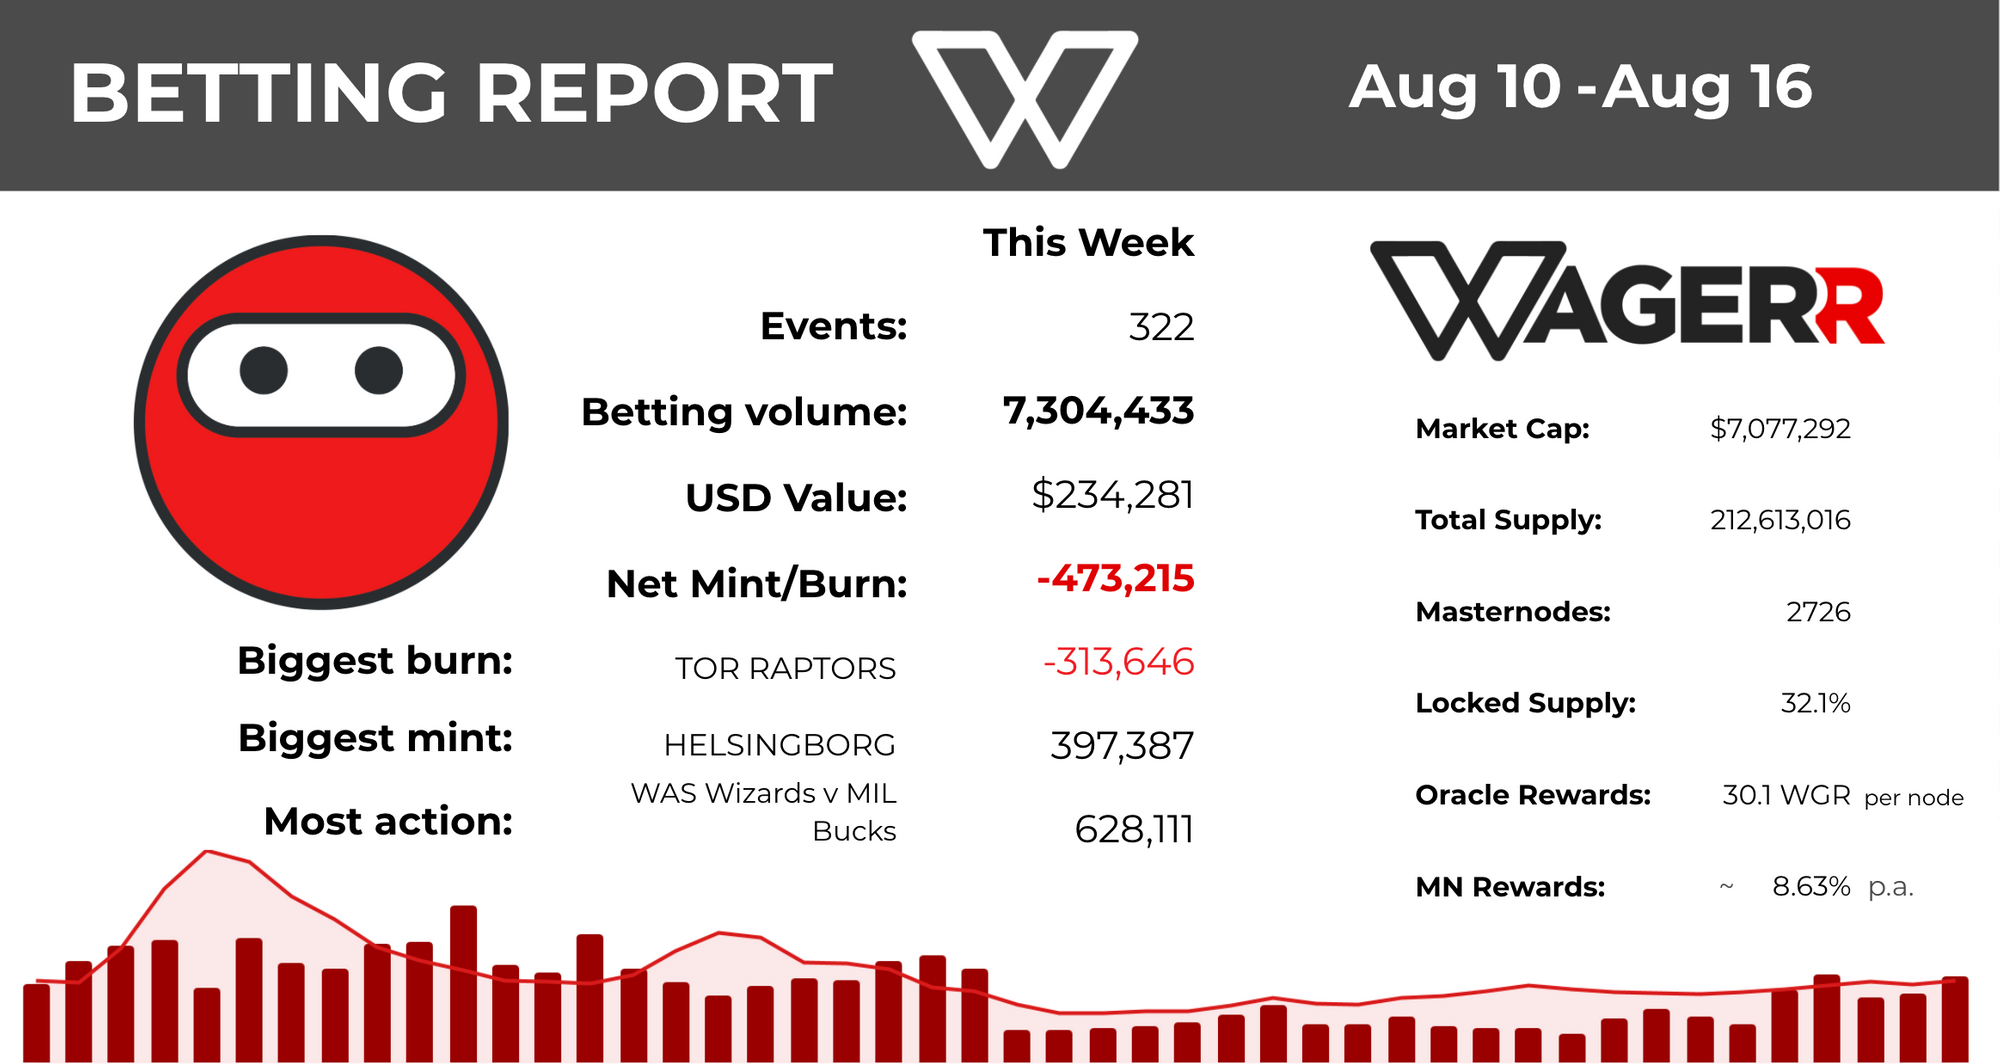 Wagerr Betting Report: August 16